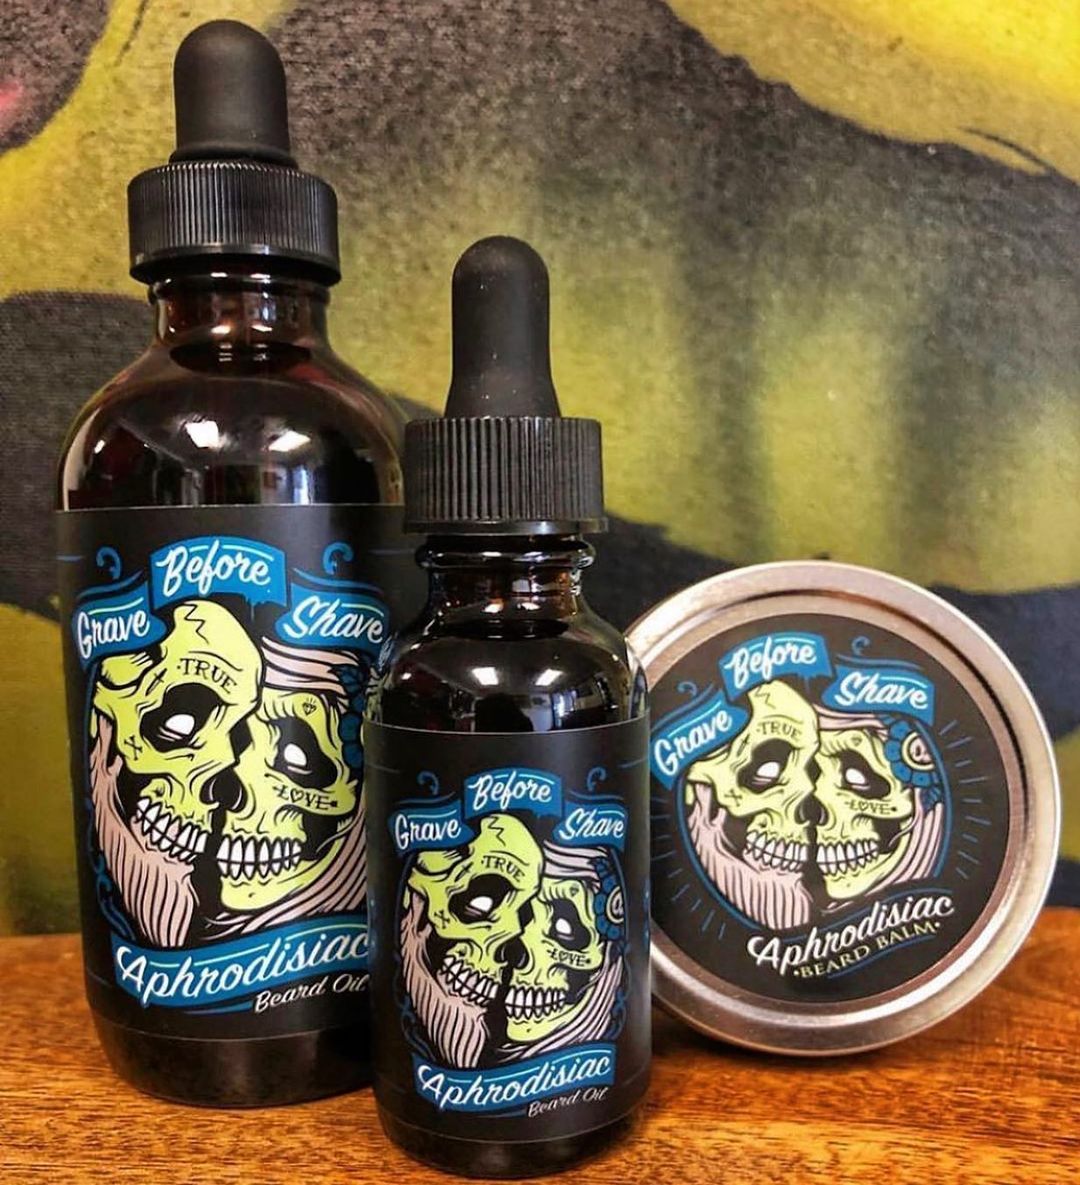 wayne bailey - Aphrodisiac Beard Oil & Beard Balm! Available in 1 or 4 ounce oils and 2 or 4 ounce balms!
.
Scented with the classic masculine aromas of leather and cedar wood!
.
Also available as a B...